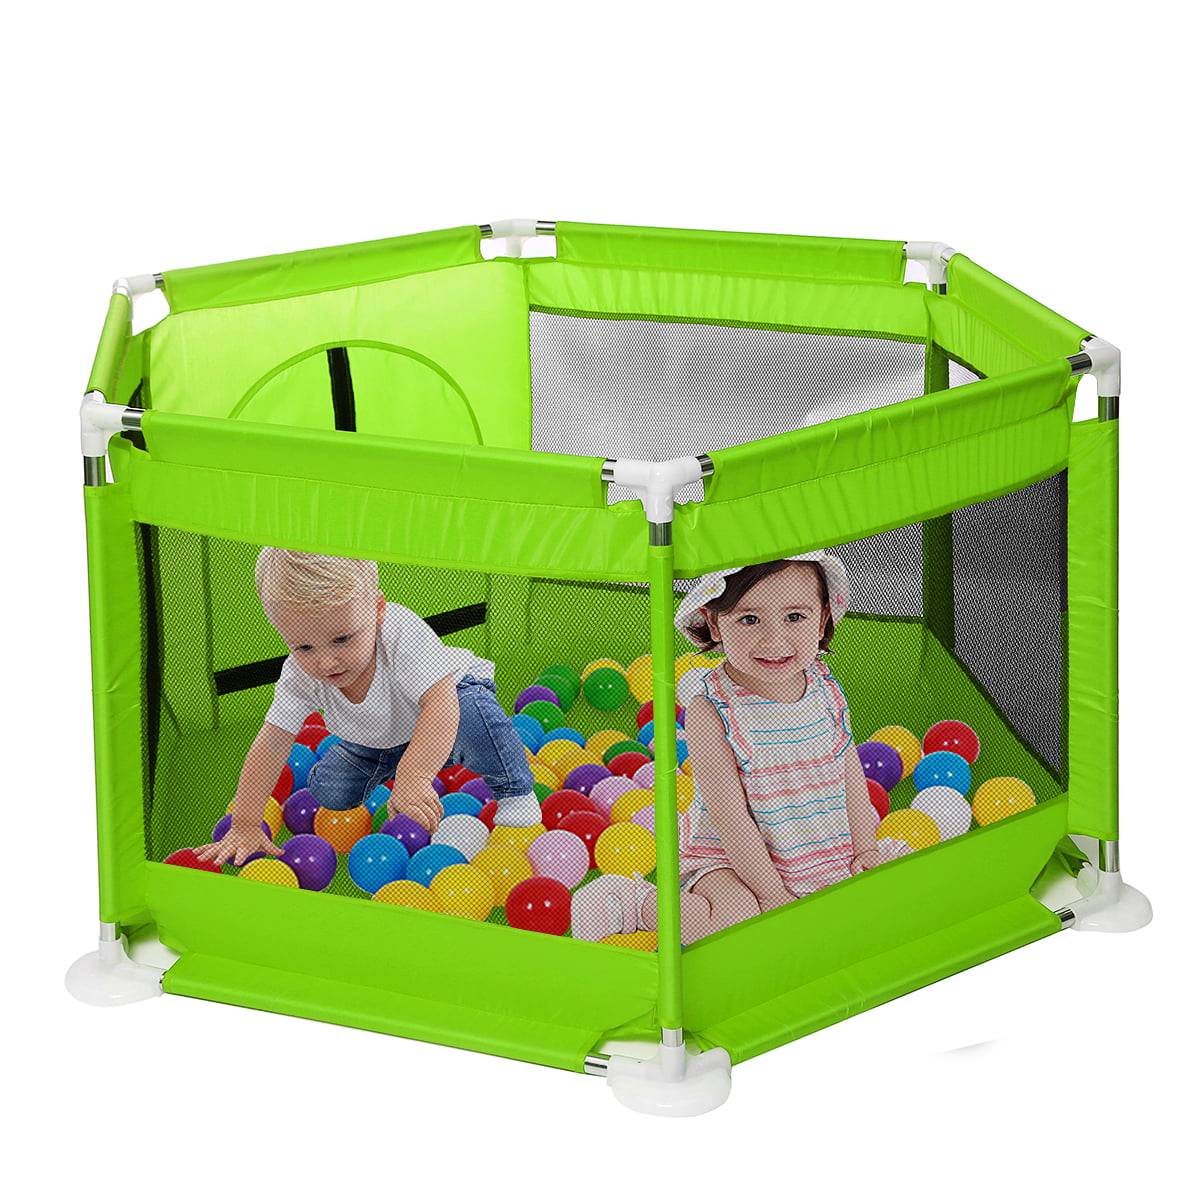 Fence Portable Pet Outdoors 6 Panel Play Pen Safety Gate Children Yard Baby Kids 